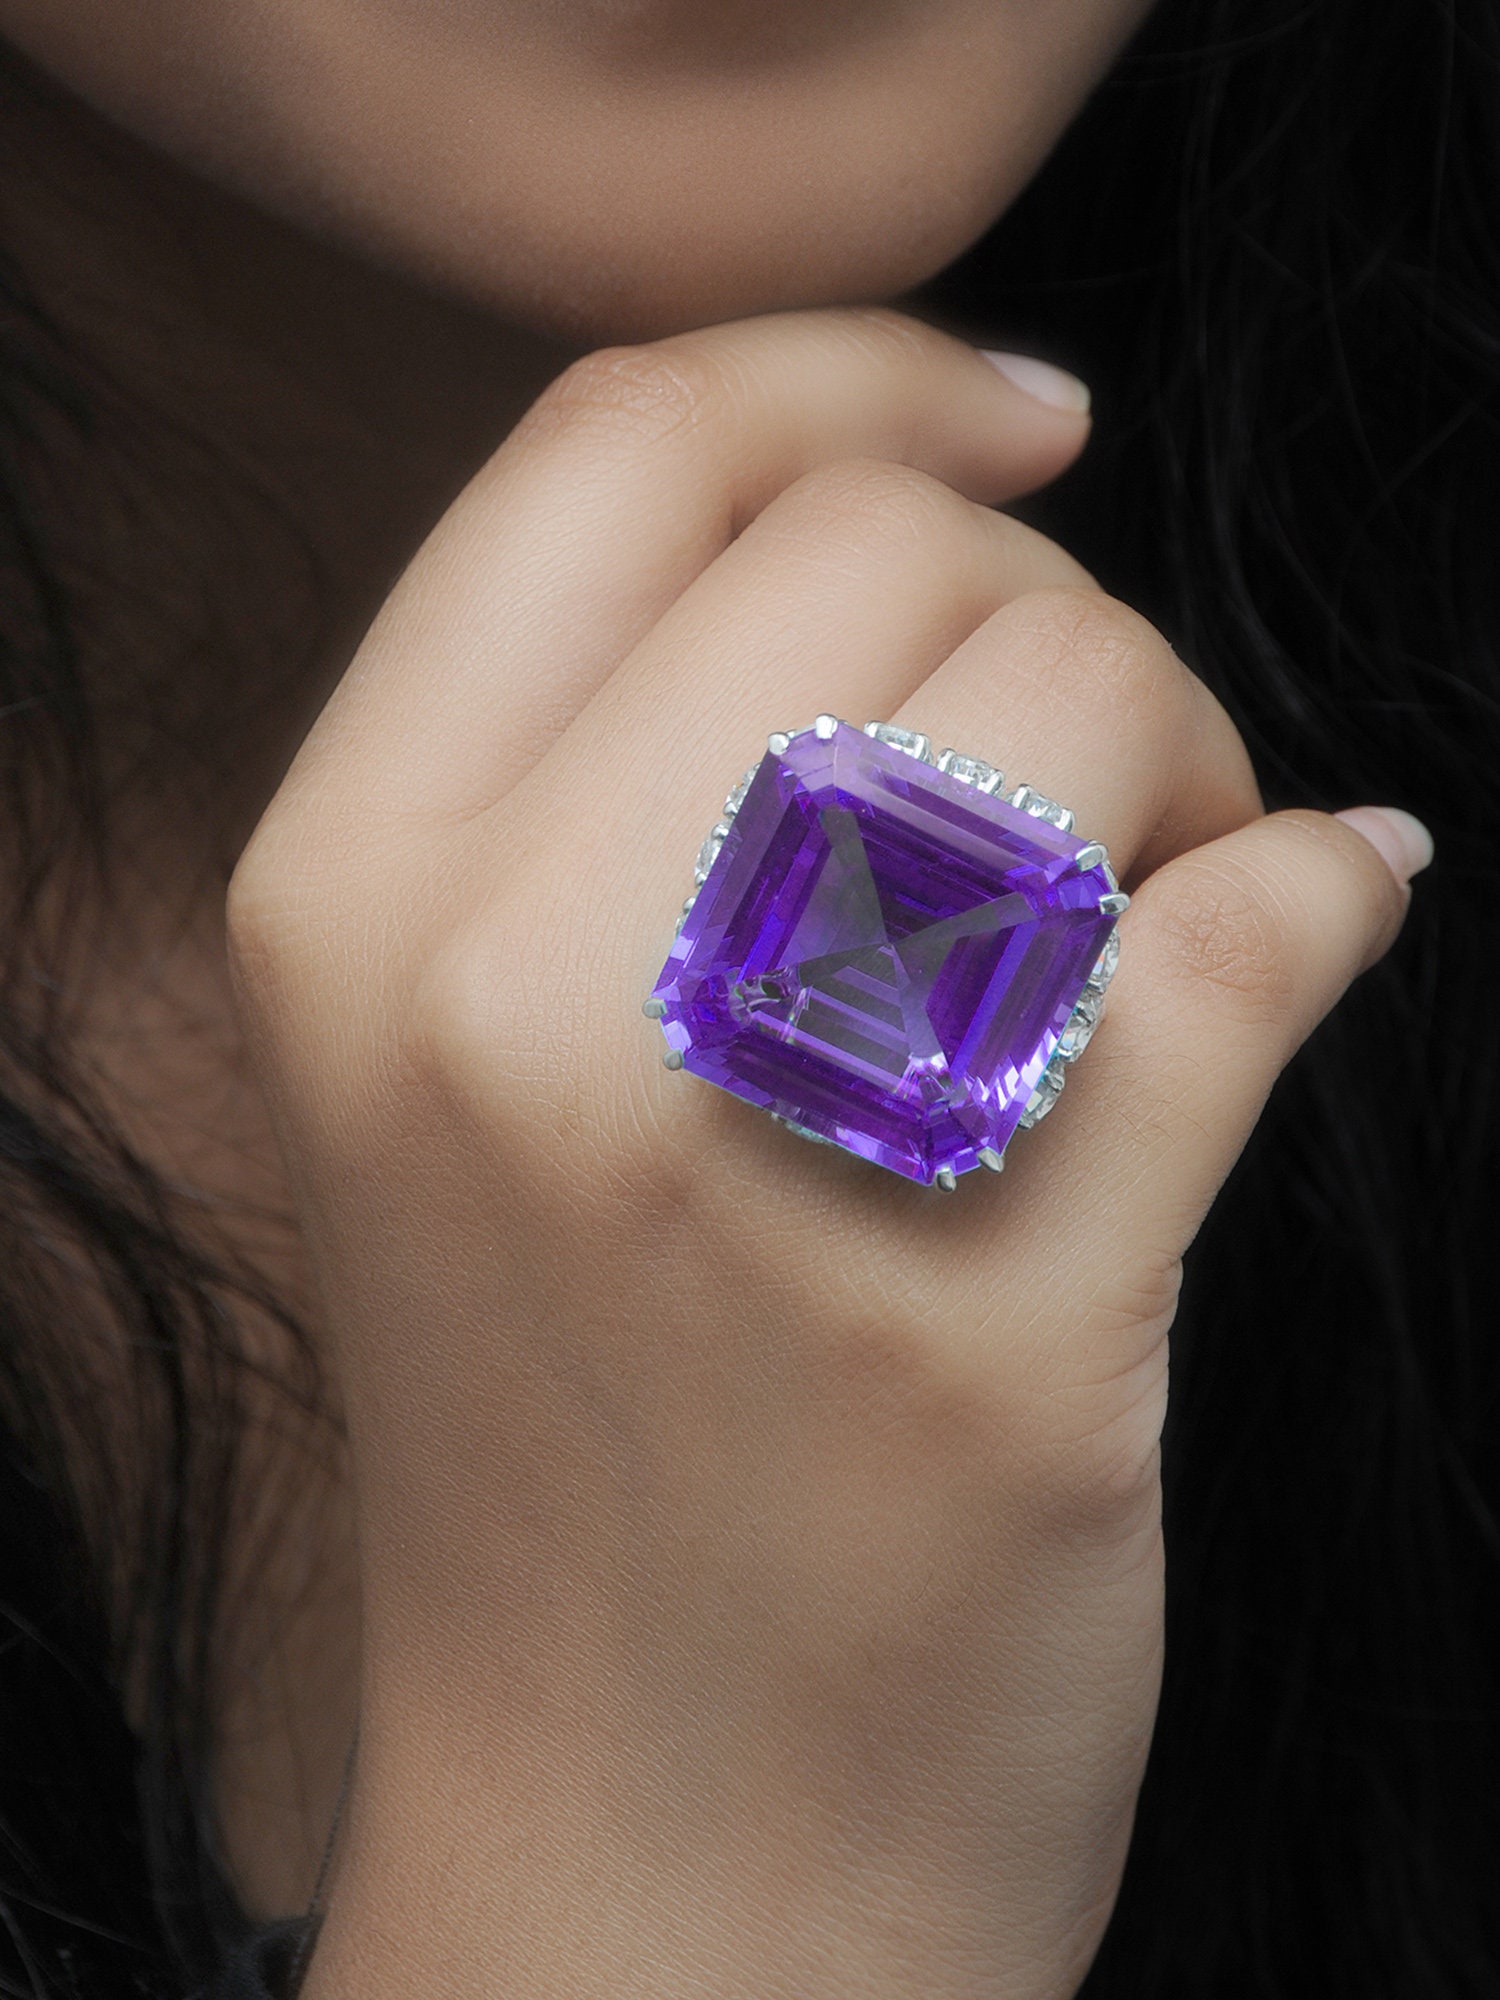 Purple Cocktail Ring, Purple Statement Ring, Crystal Cocktail Ring, Purple  Gold Purple Ring, Crystal Ring, Gift for Her, Gift for Christmas - Etsy |  Crystal cocktail ring, Purple rings, Crystal rings